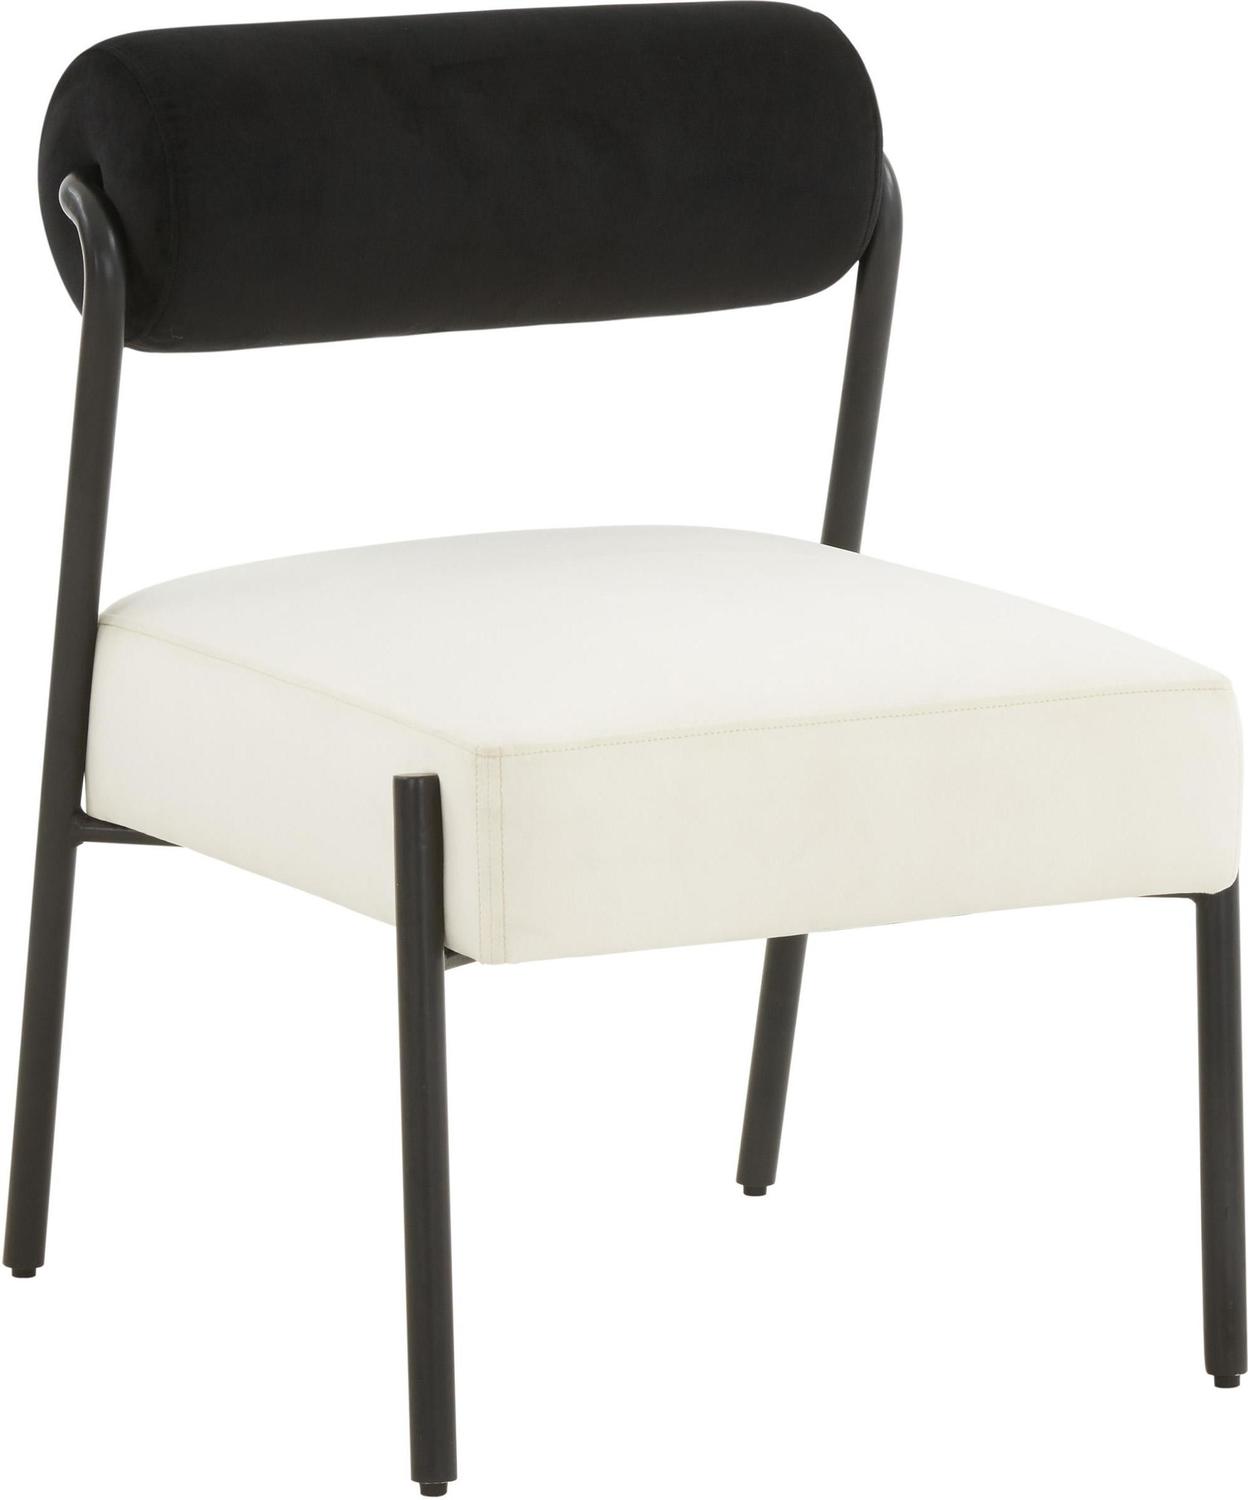 Tov Furniture Accent Chairs Chairs Black,Cream